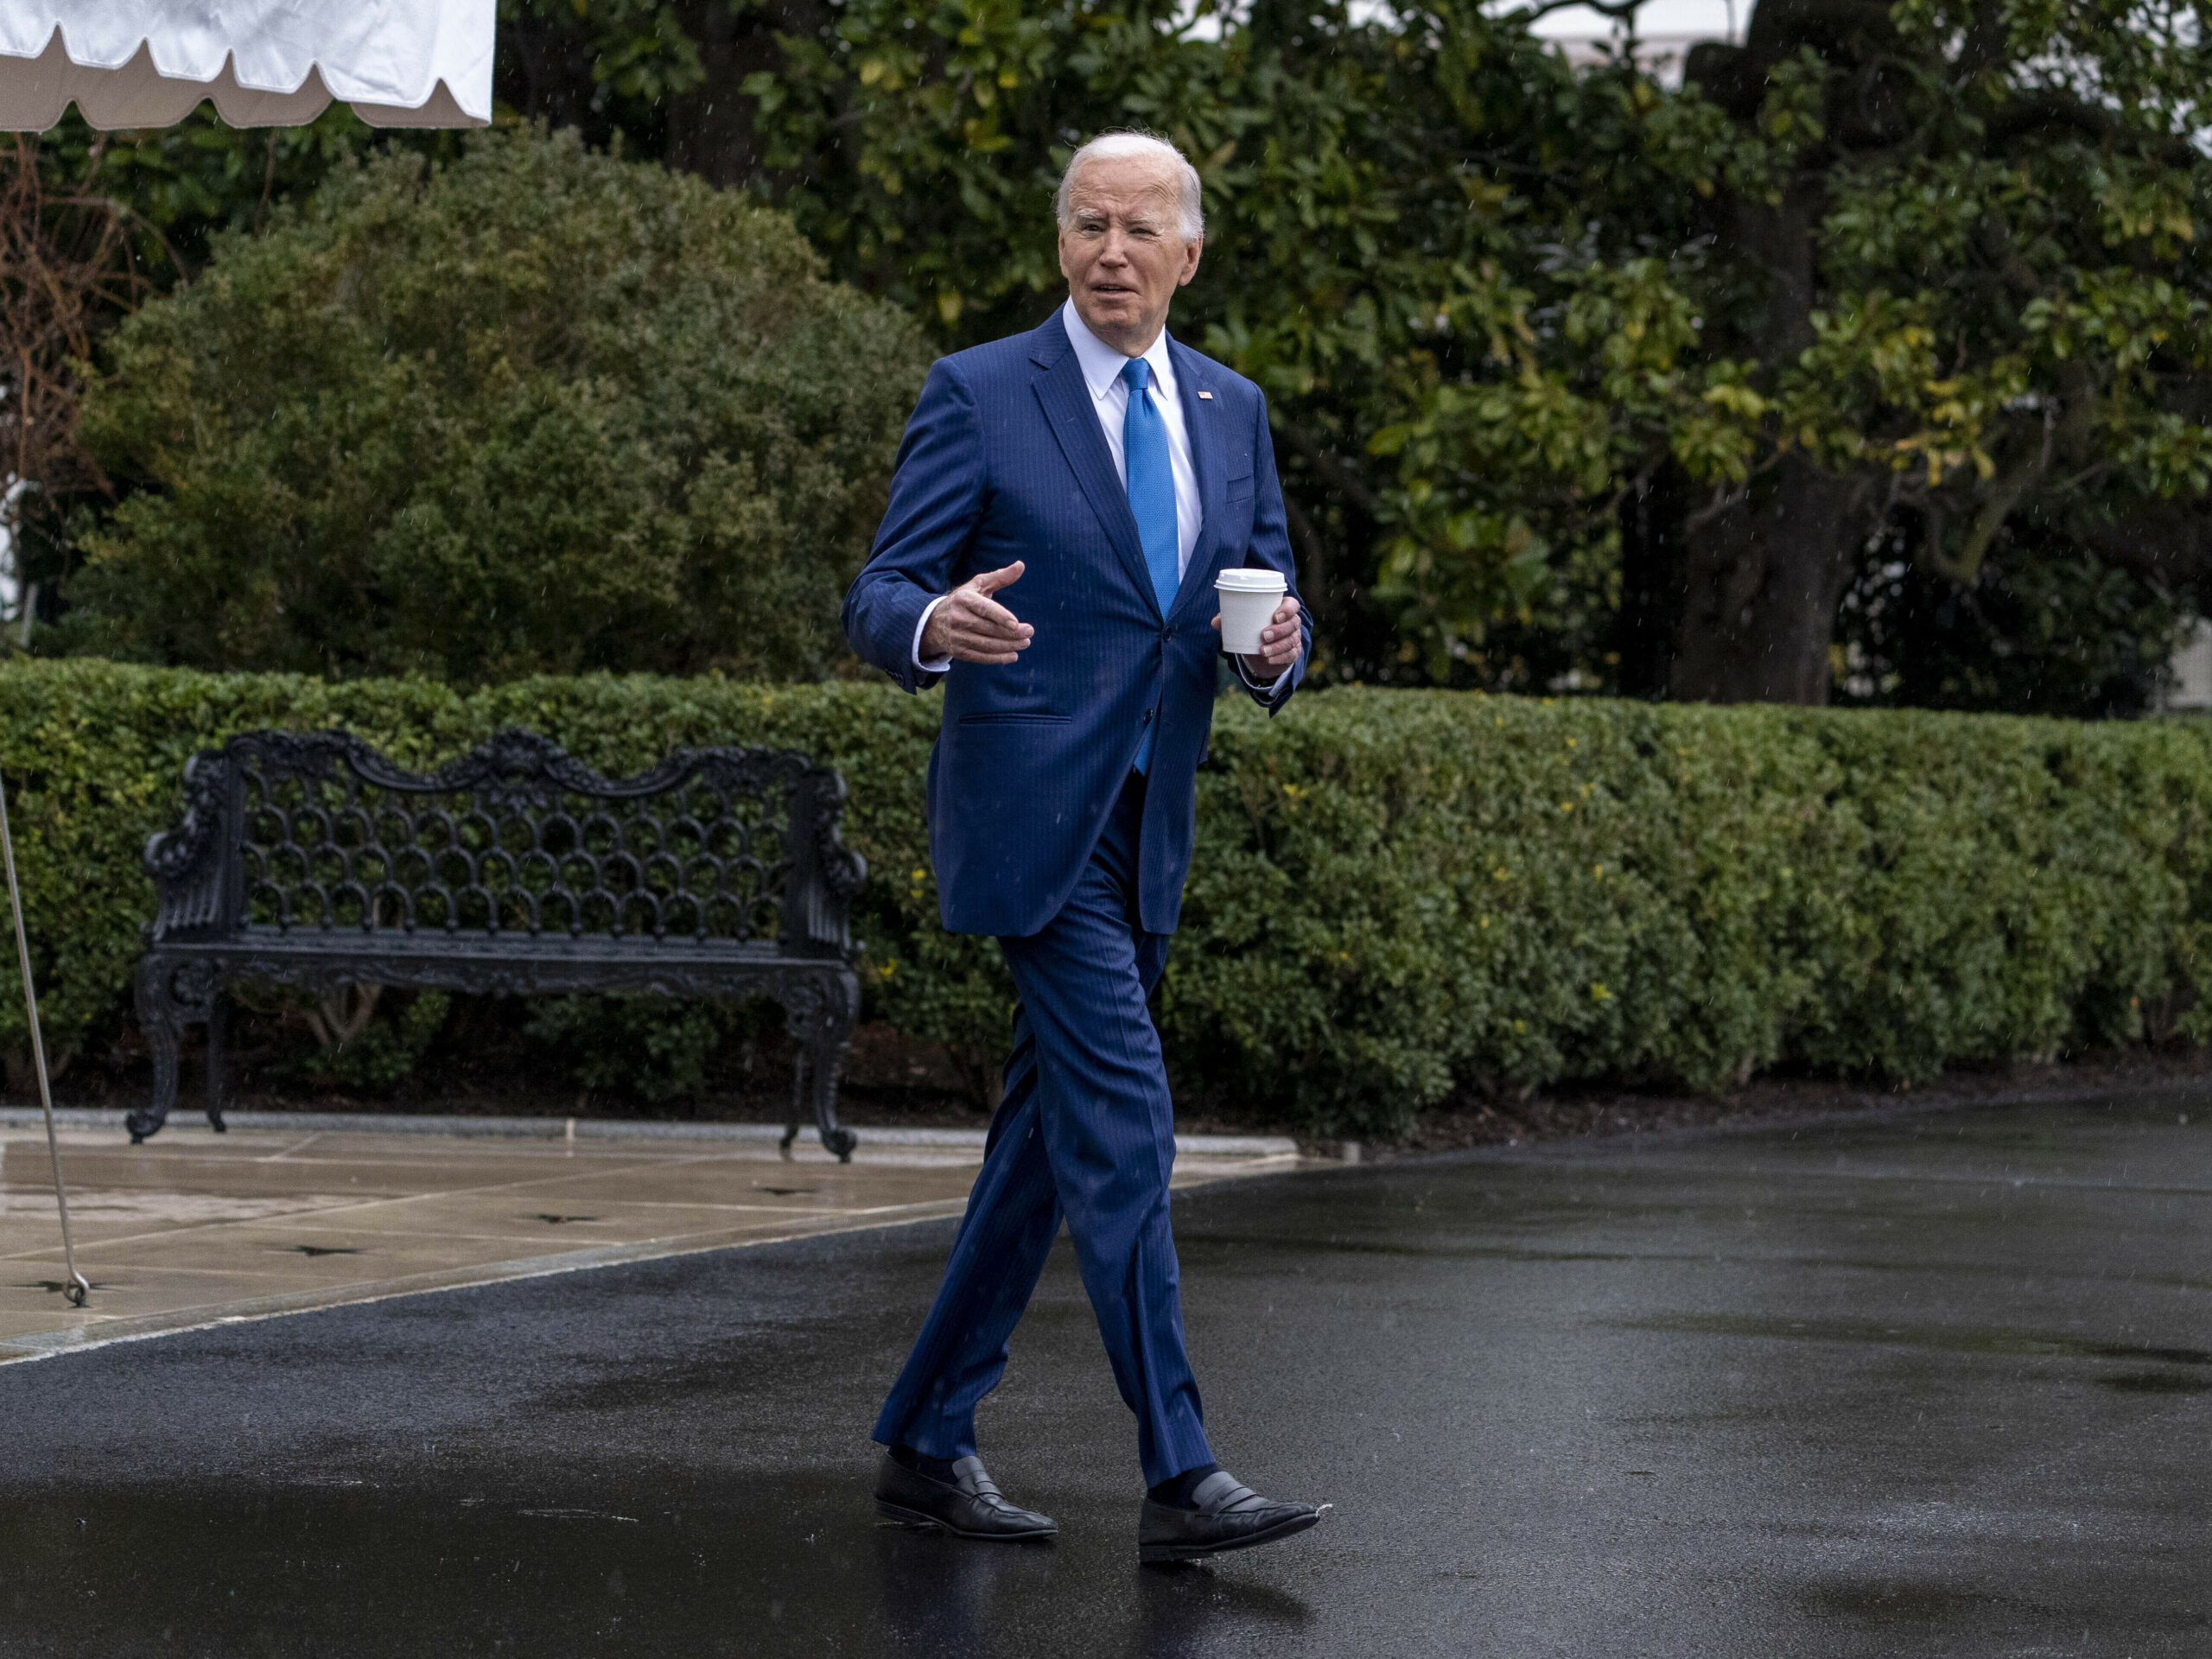 President Biden walks out of the White House on Feb. 28 to board Marine One for a short trip to Walter Reed National Military Medical Center in Bethesda, Md., for his annual physical.